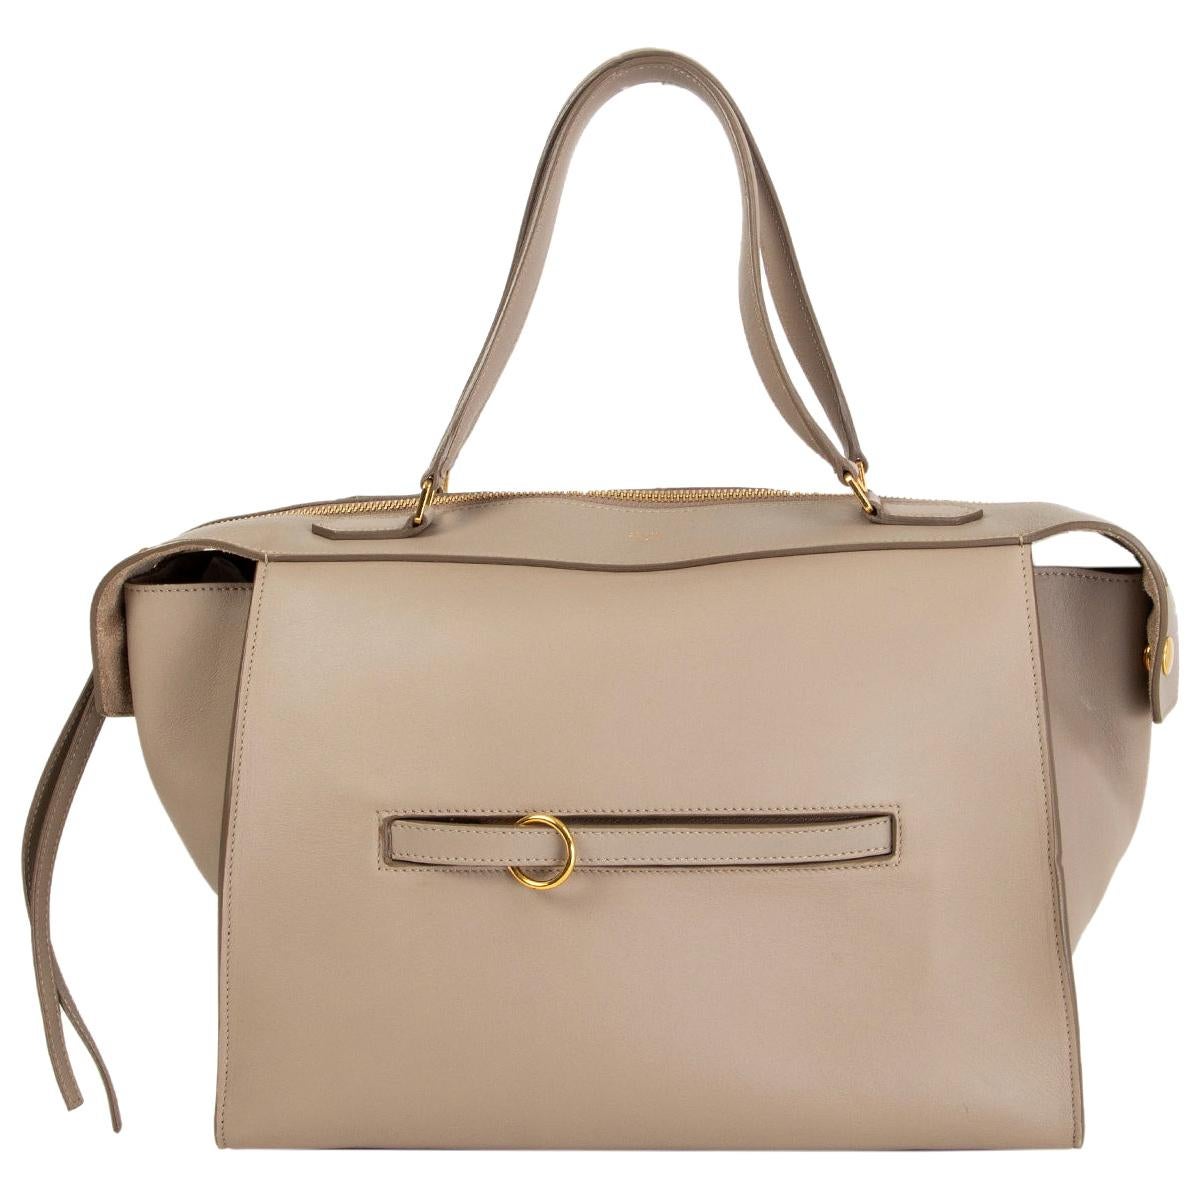 CELINE taupe leather RING Top Handle Bag